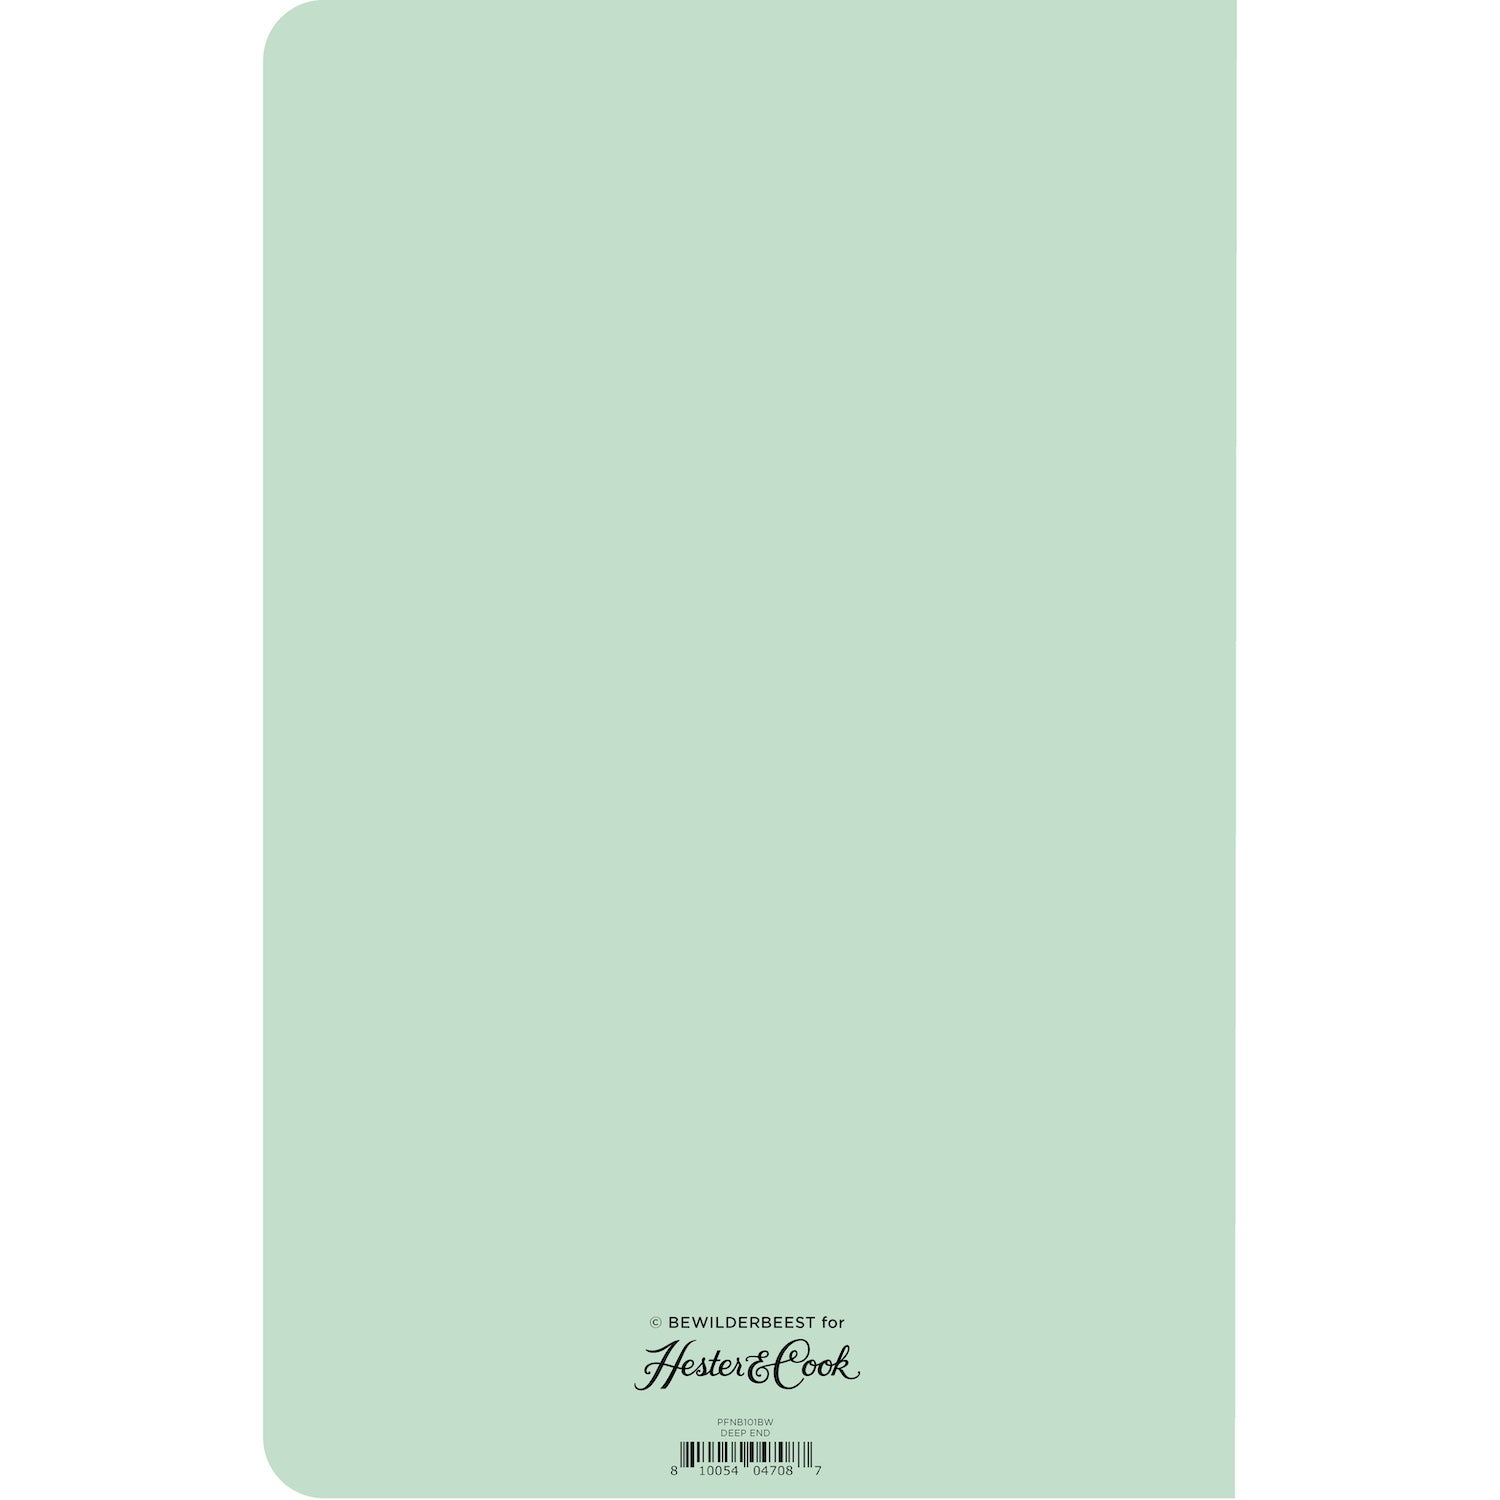 The back cover of the Deep End Notebook is solid mint green with the Hester &amp; Cook logo printed at the bottom.